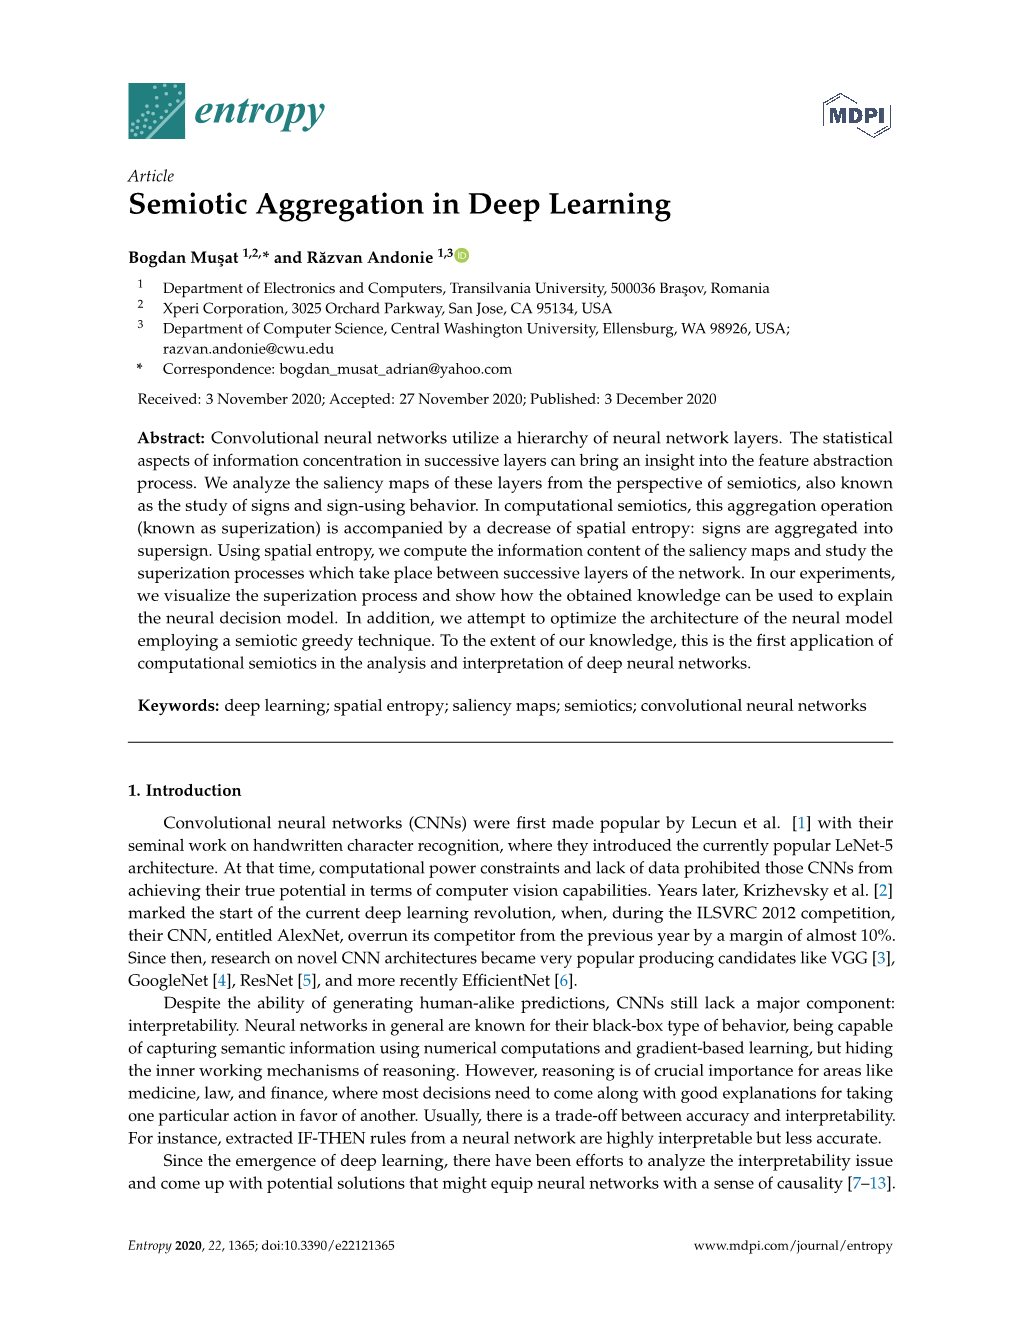 Semiotic Aggregation in Deep Learning